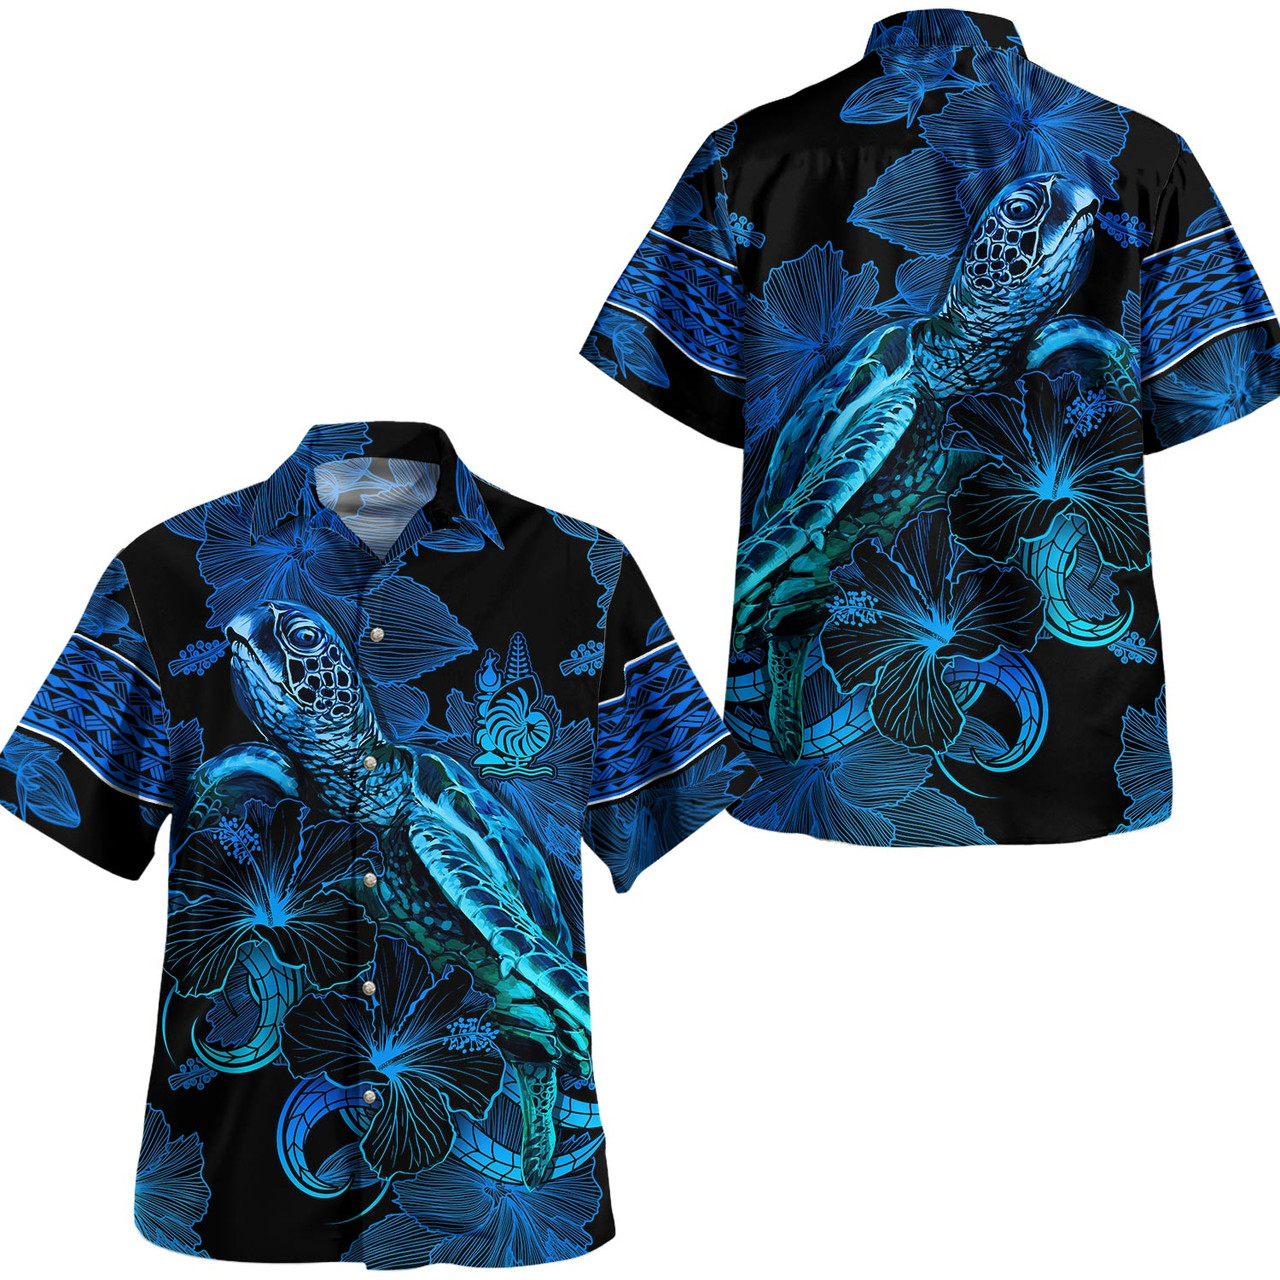 New Caledonia Combo Puletasi And Shirt Sea Turtle With Blooming Hibiscus Flowers Tribal Blue